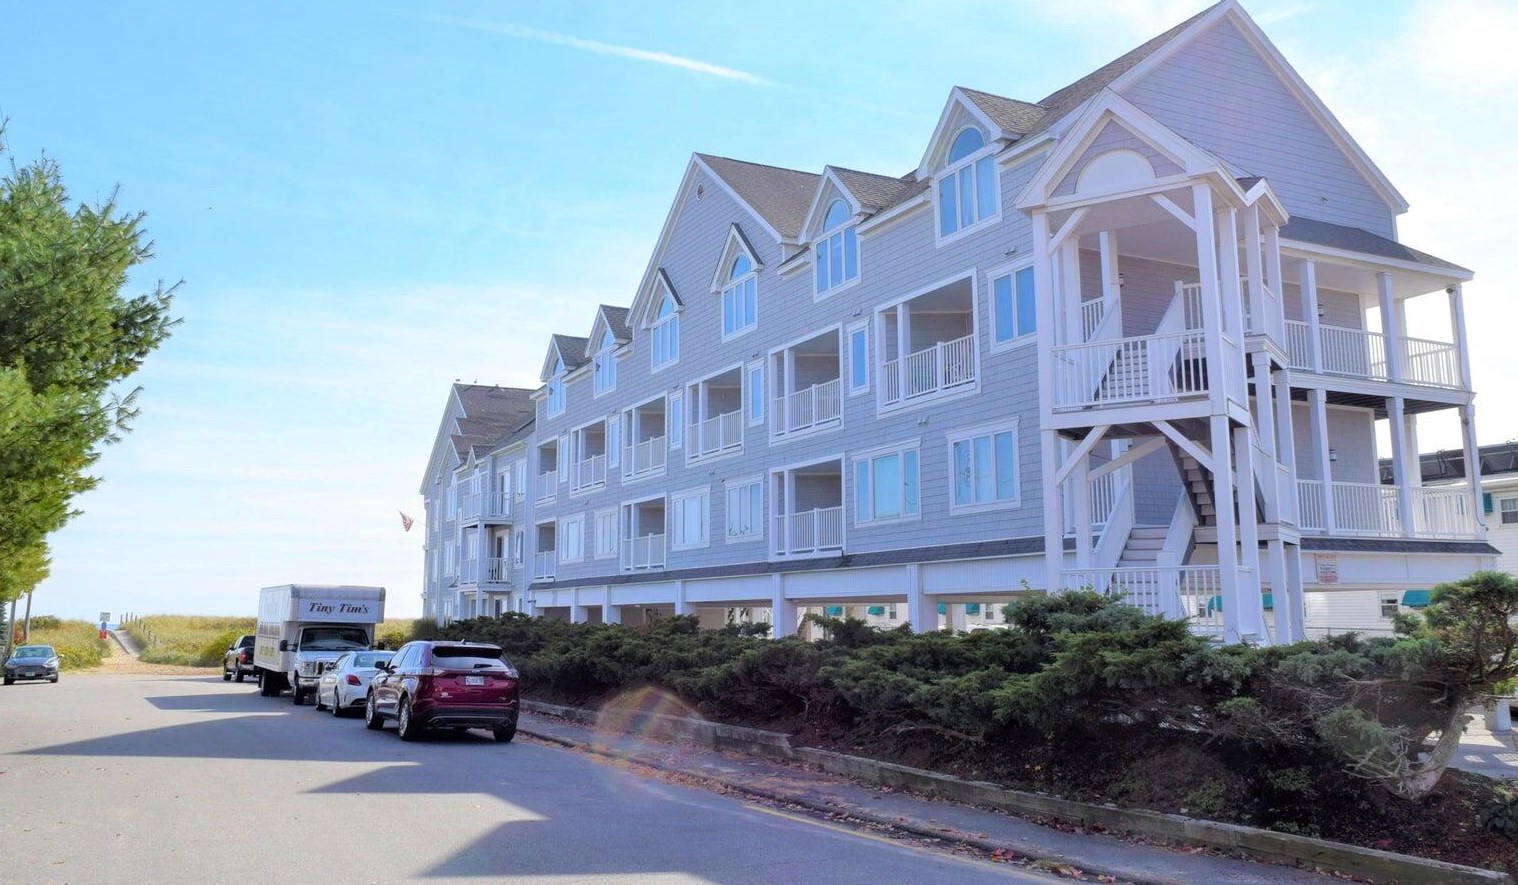 1 Ocean Ave, Old Orchard Beach, ME 04064 exterior